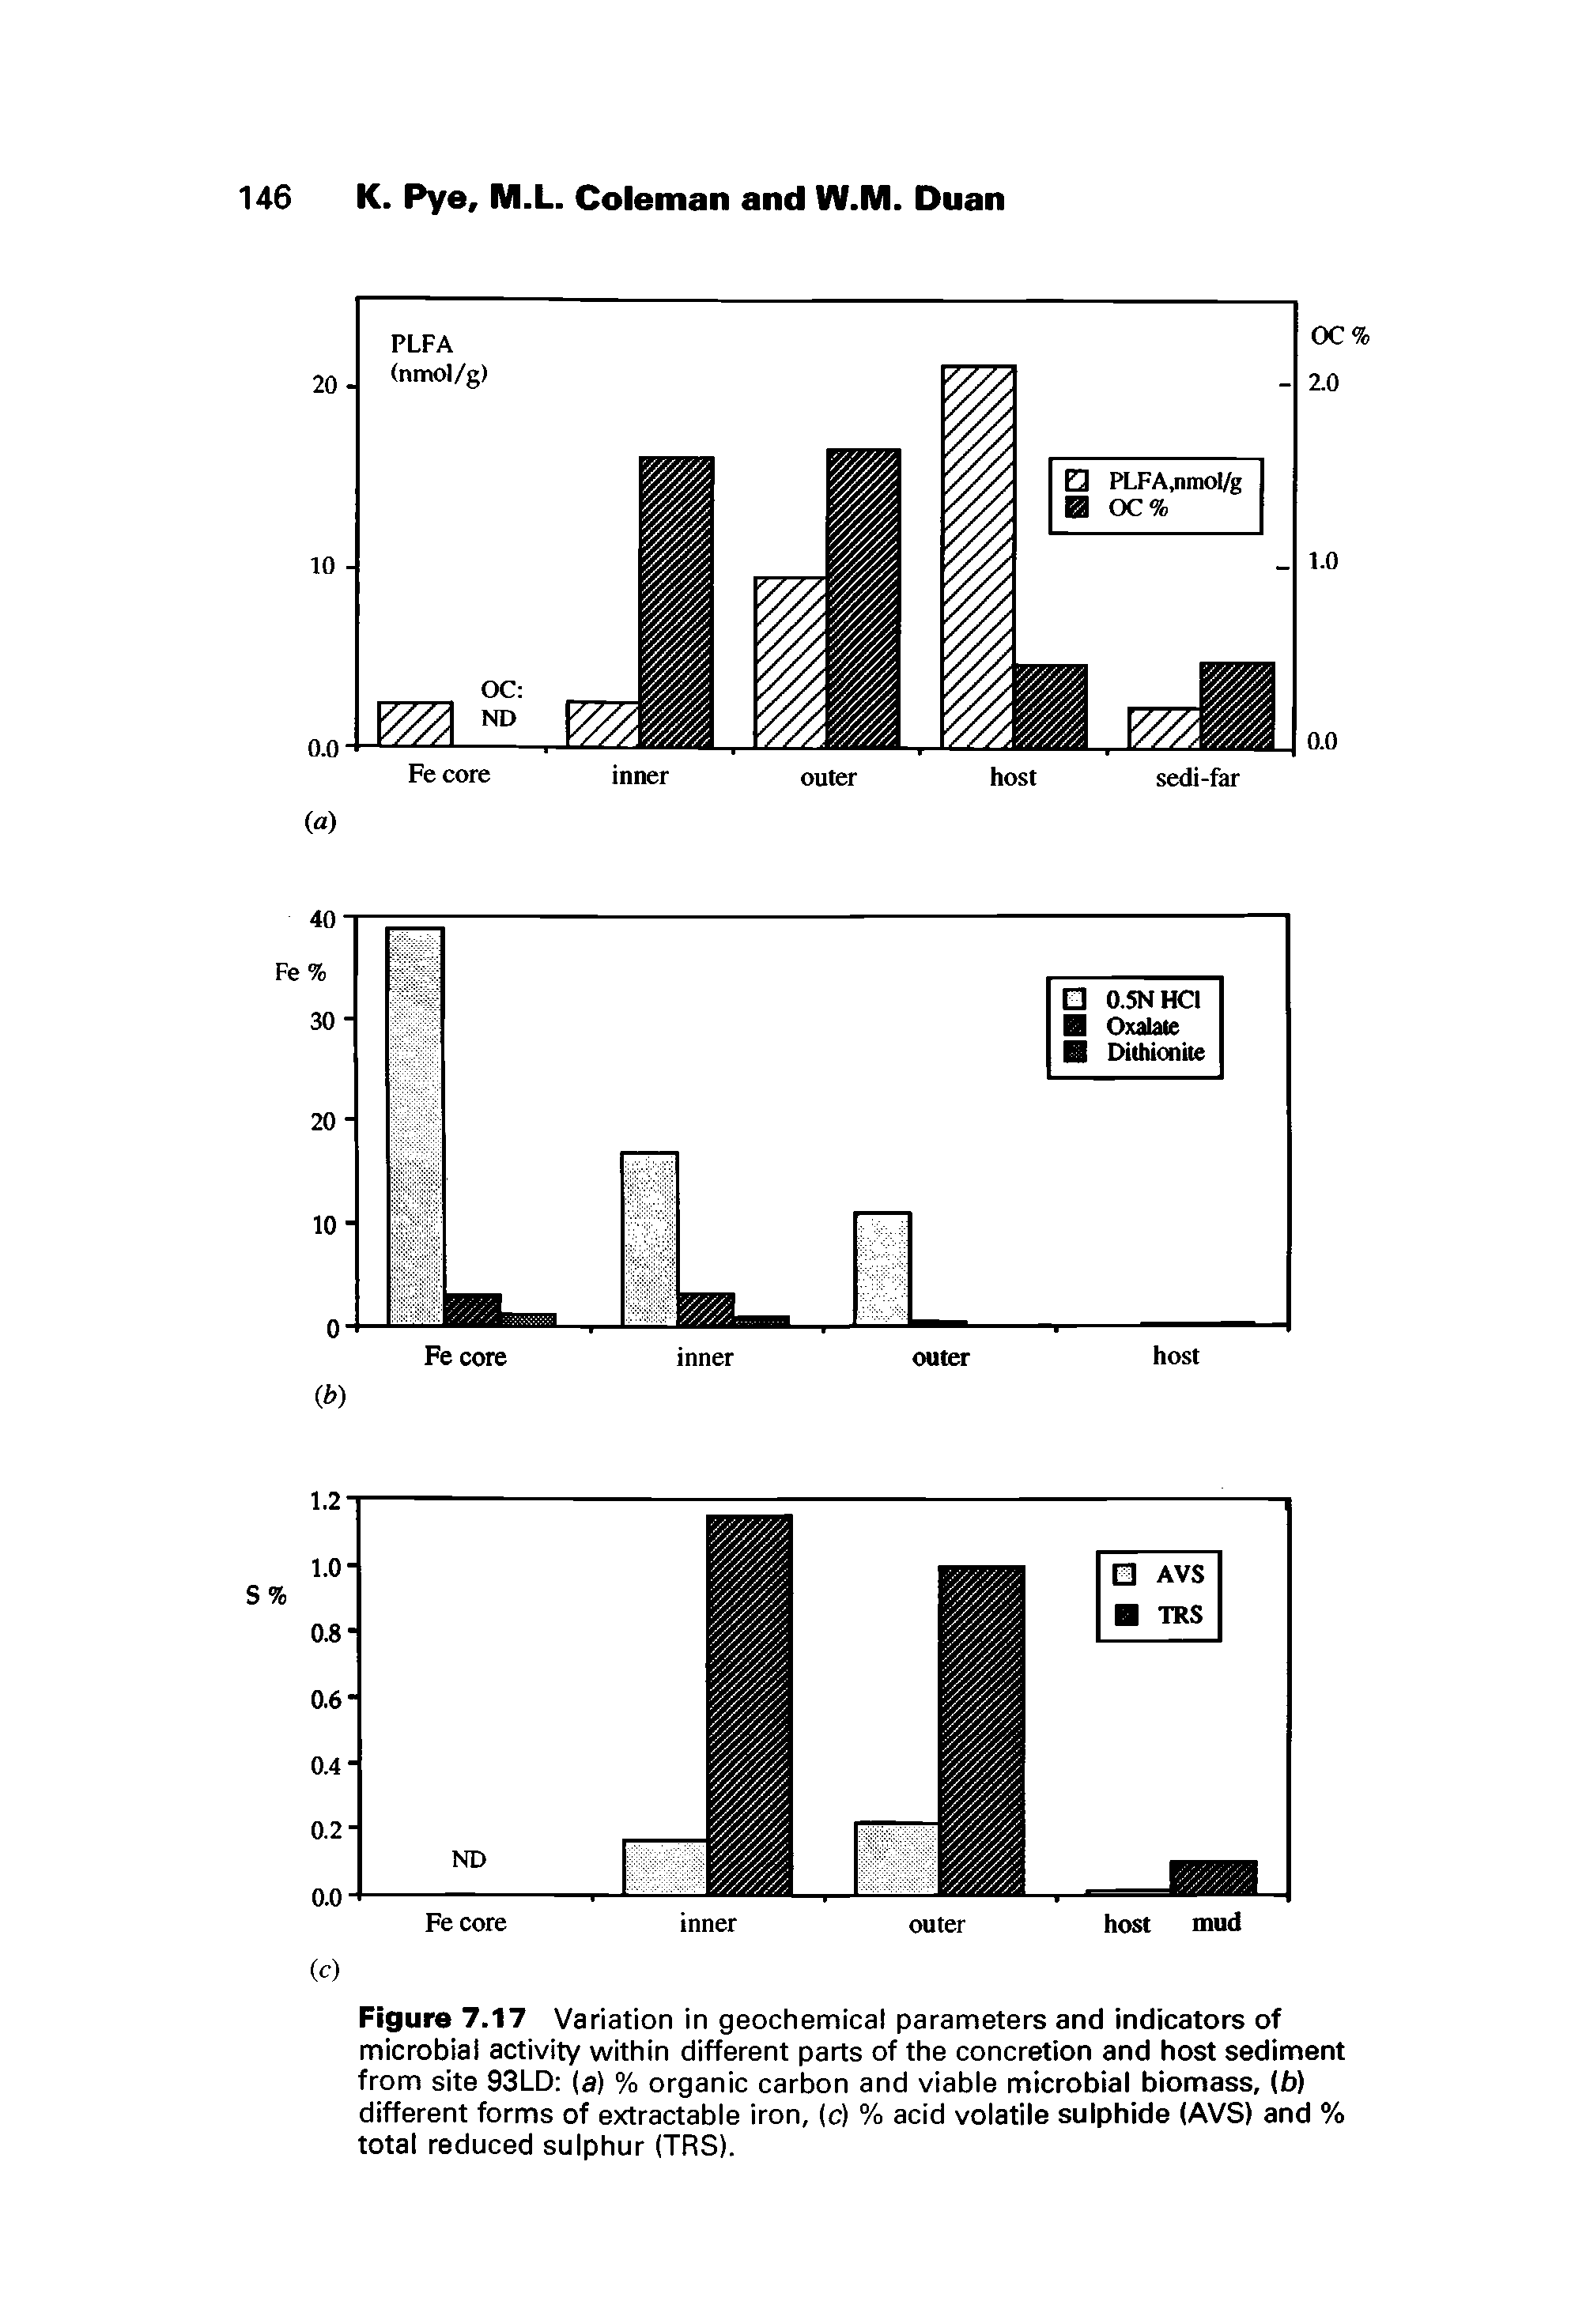 Figure 7.17 Variation in geochemical parameters and indicators of microbial activity within different parts of the concretion and host sediment from site 93LD (a) % organic carbon and viable microbial biomass, (b) different forms of extractable iron, (c) % acid volatile sulphide (AVS) and % total reduced sulphur (TRS).